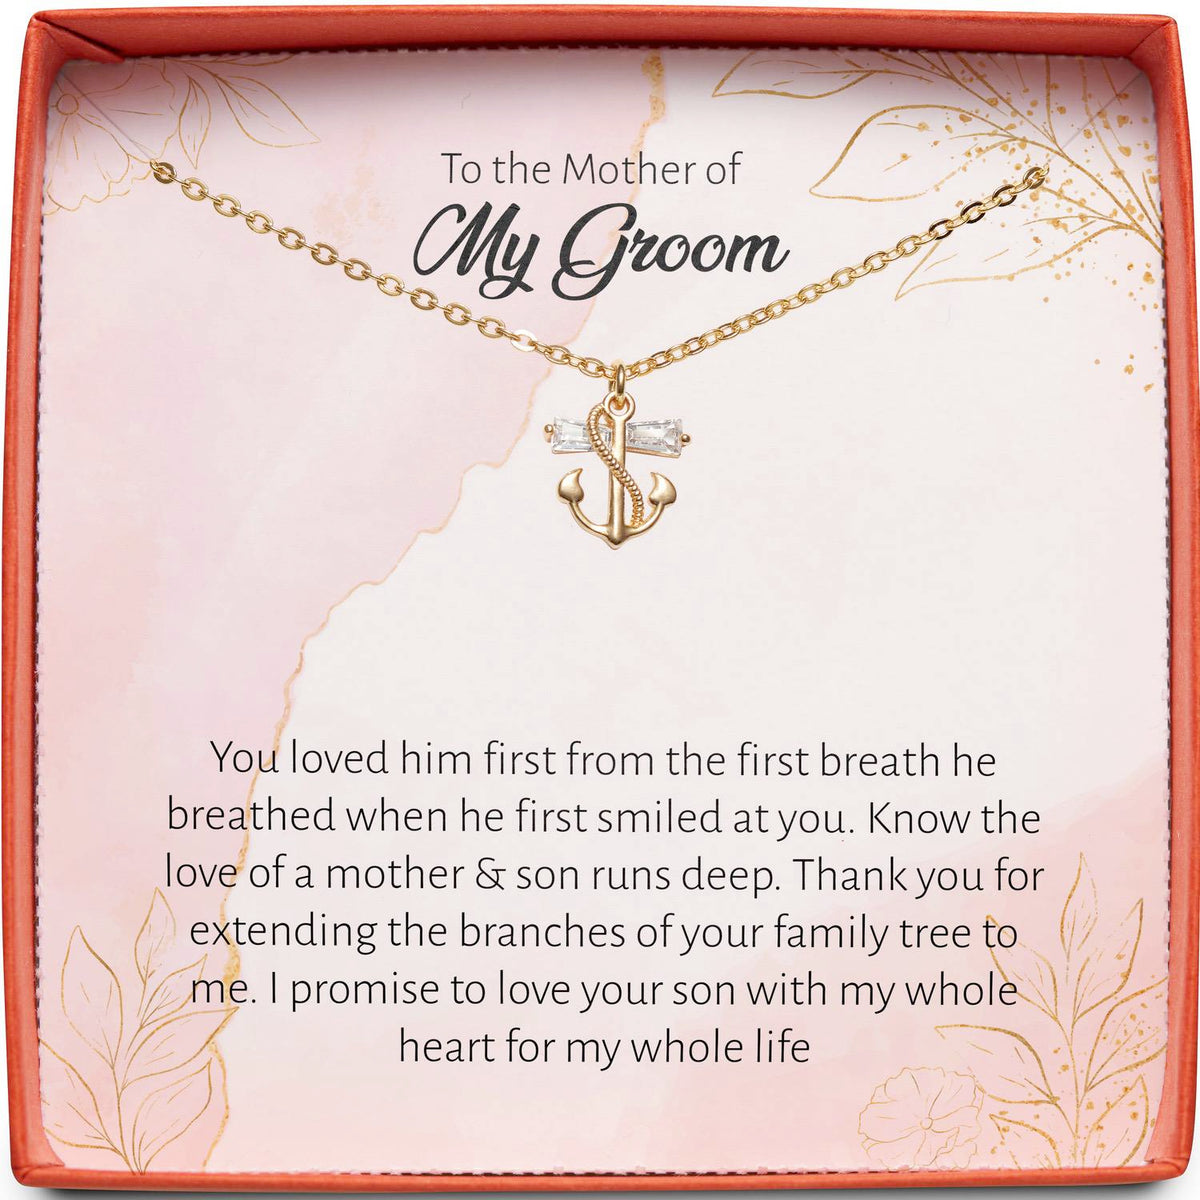 To the Mother of My Groom (From Bride) | First Breath | Anchor Necklace